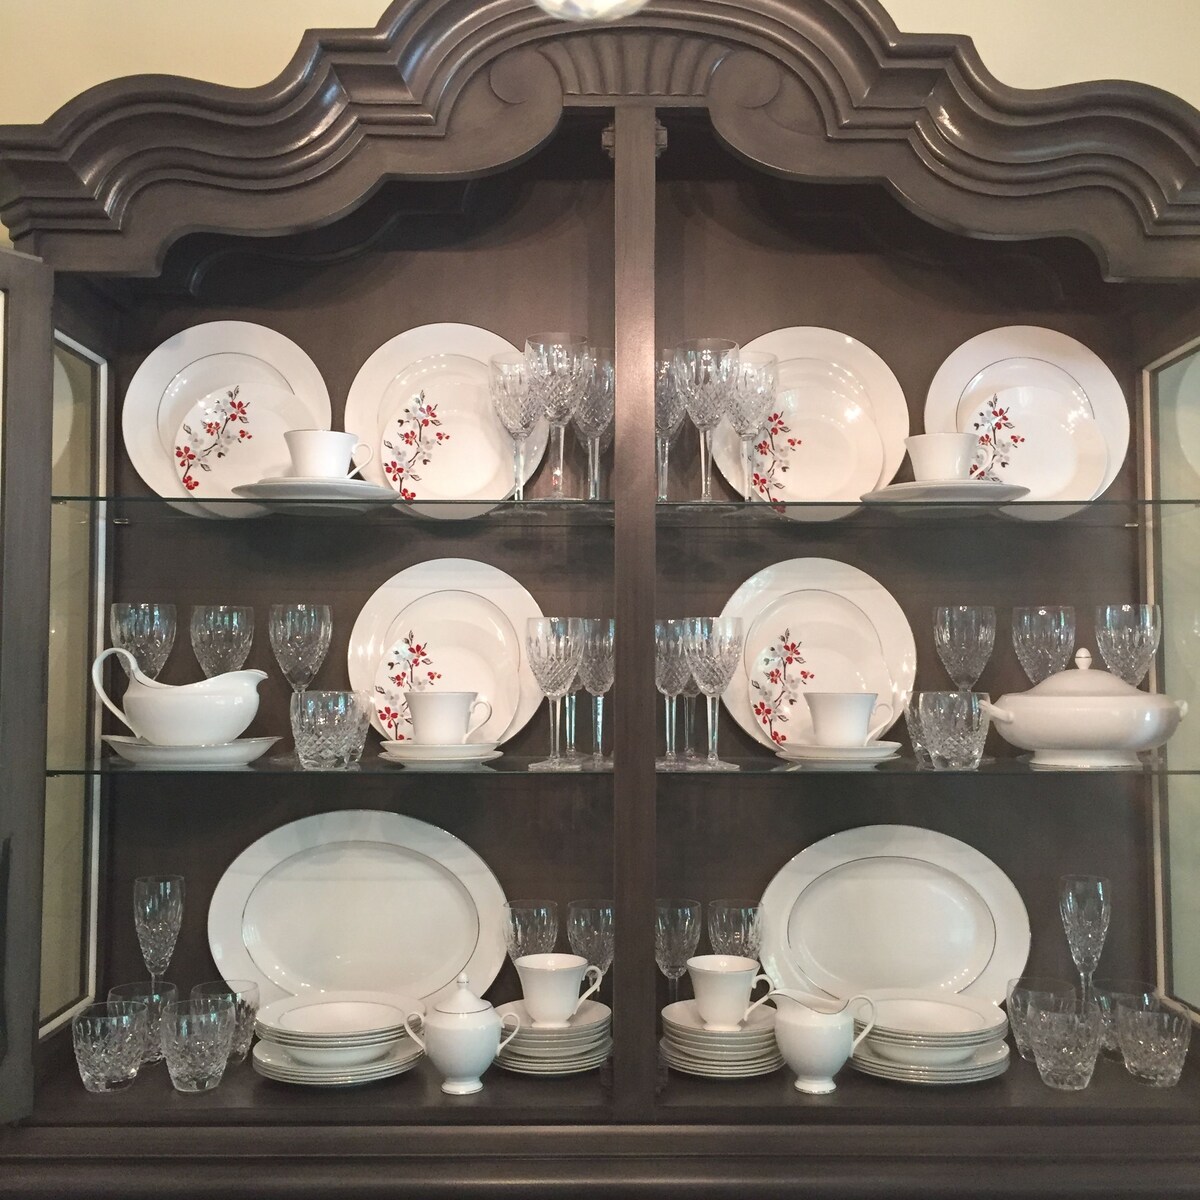 What Is The Proper Way To Display A Set Of Crystal Glasses In A Hutch?